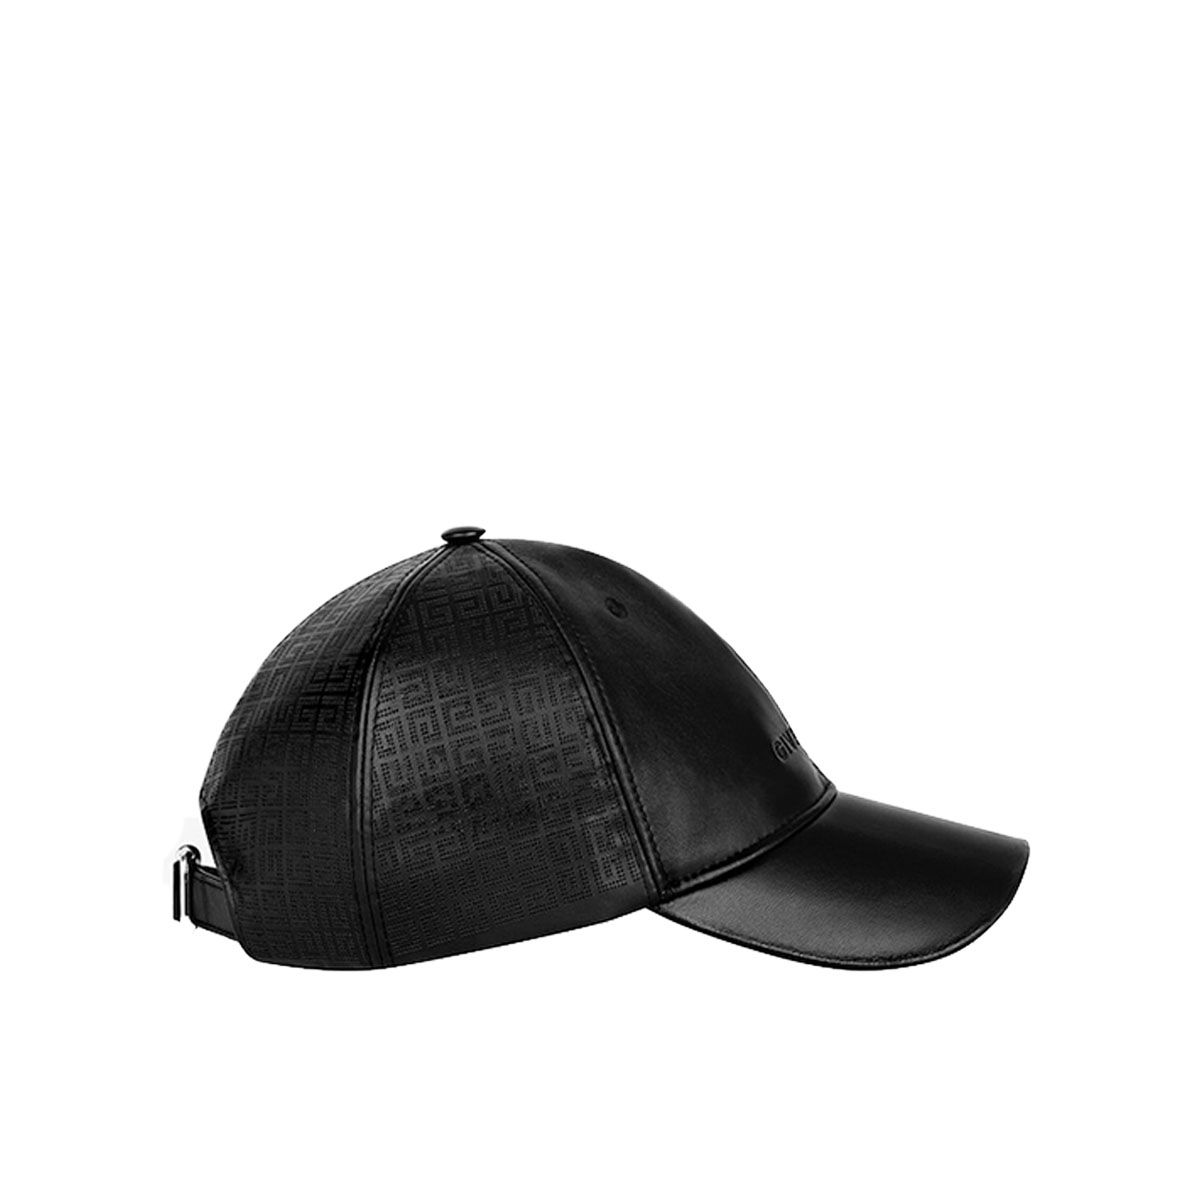 4G Perforated Leather Cap